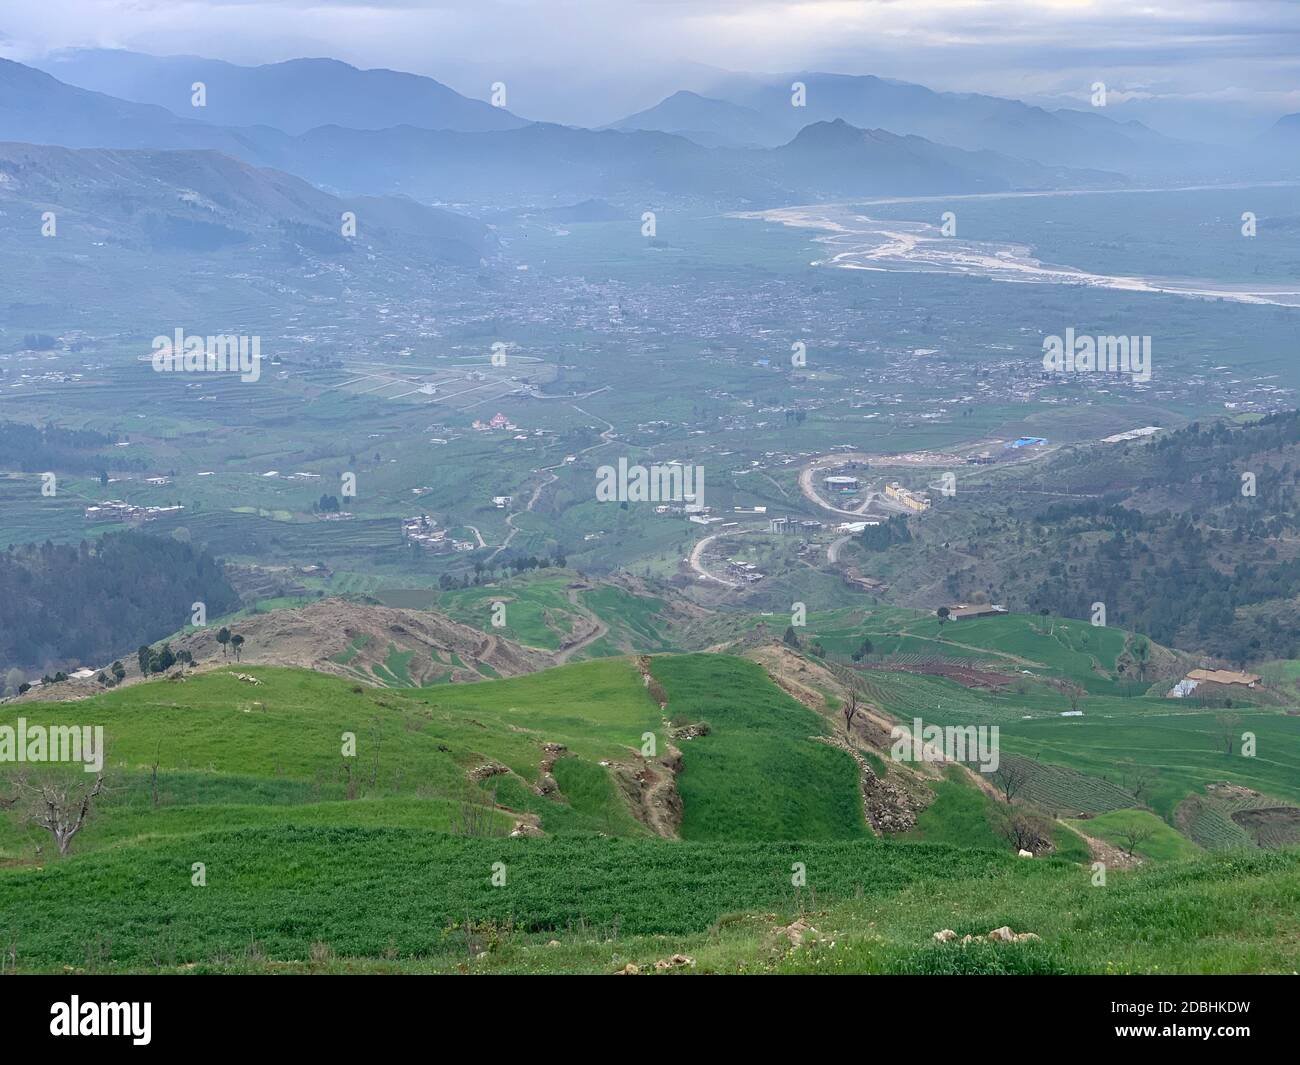 Swat valley, view from one of the mountains in summer Stock Photo